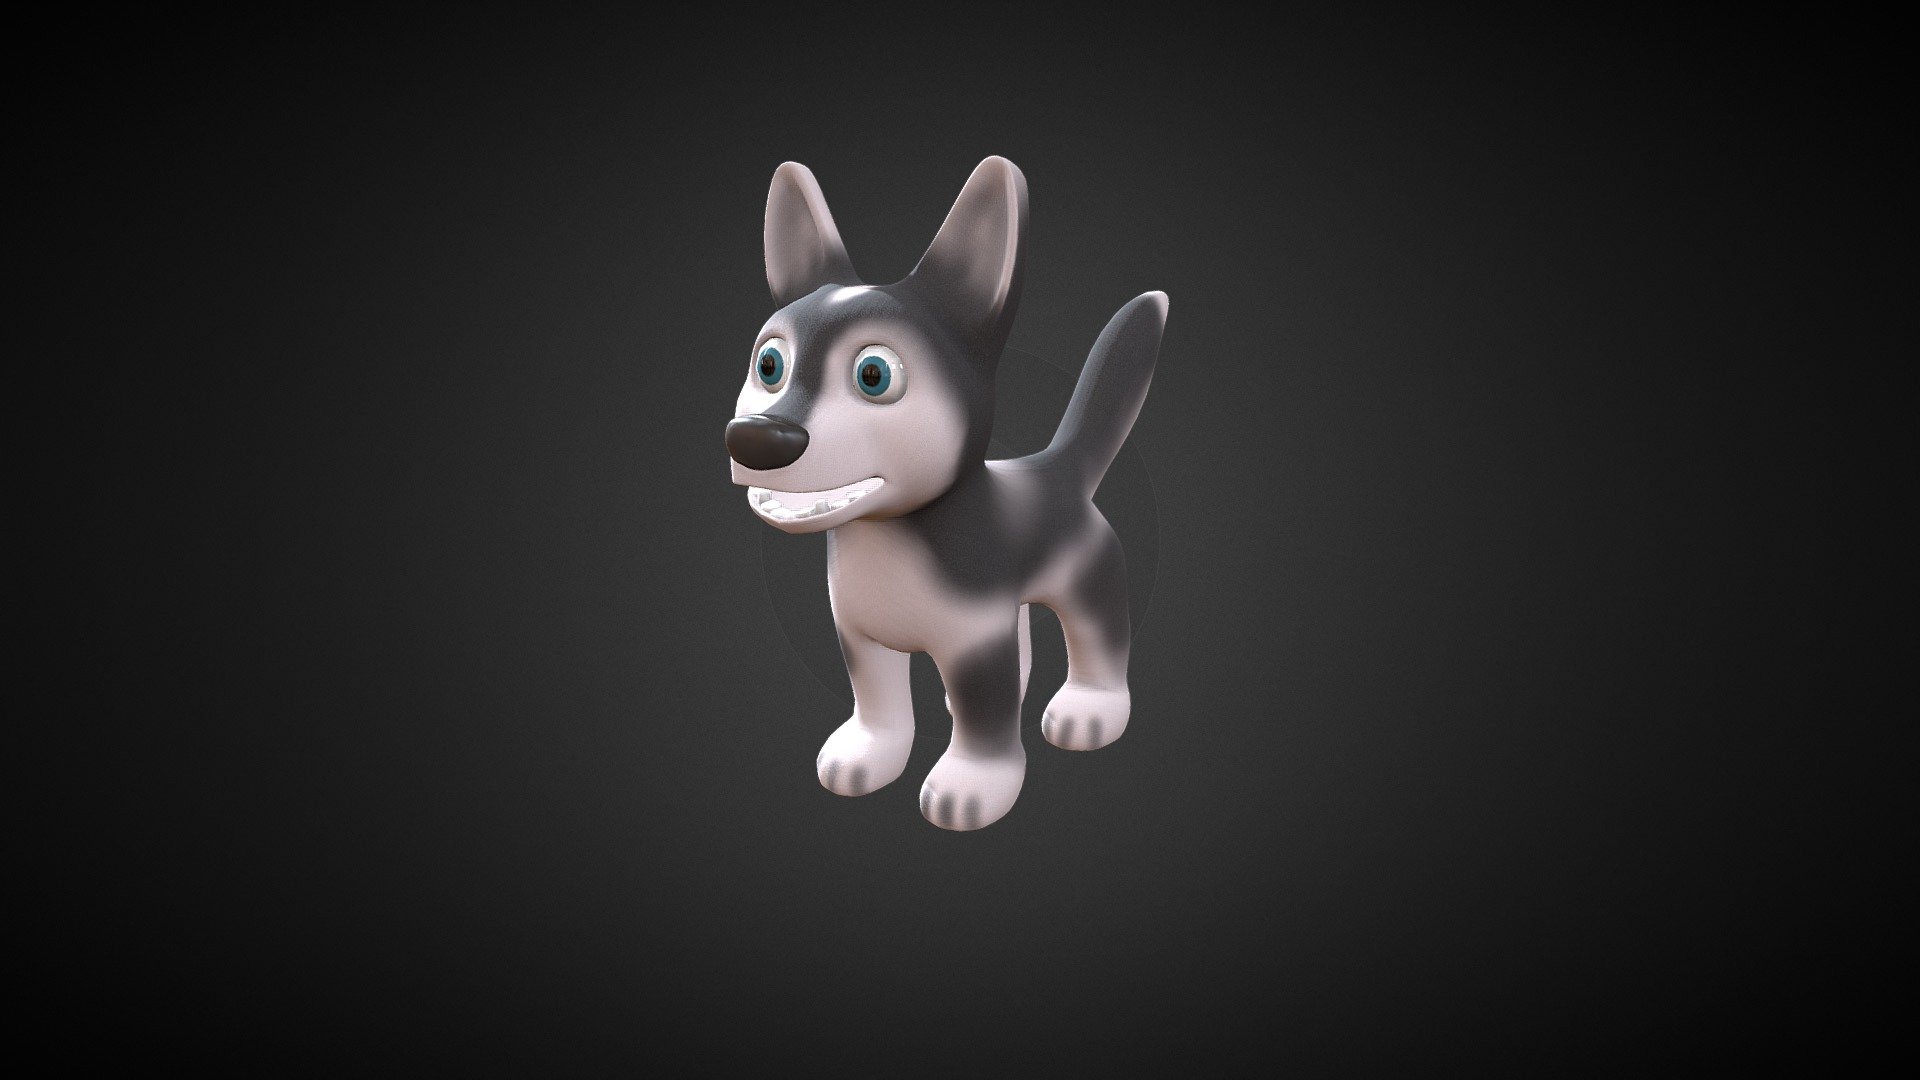 This is a cartoon dog, made in blender and textured in substance painter. It was used for an animation 3d model